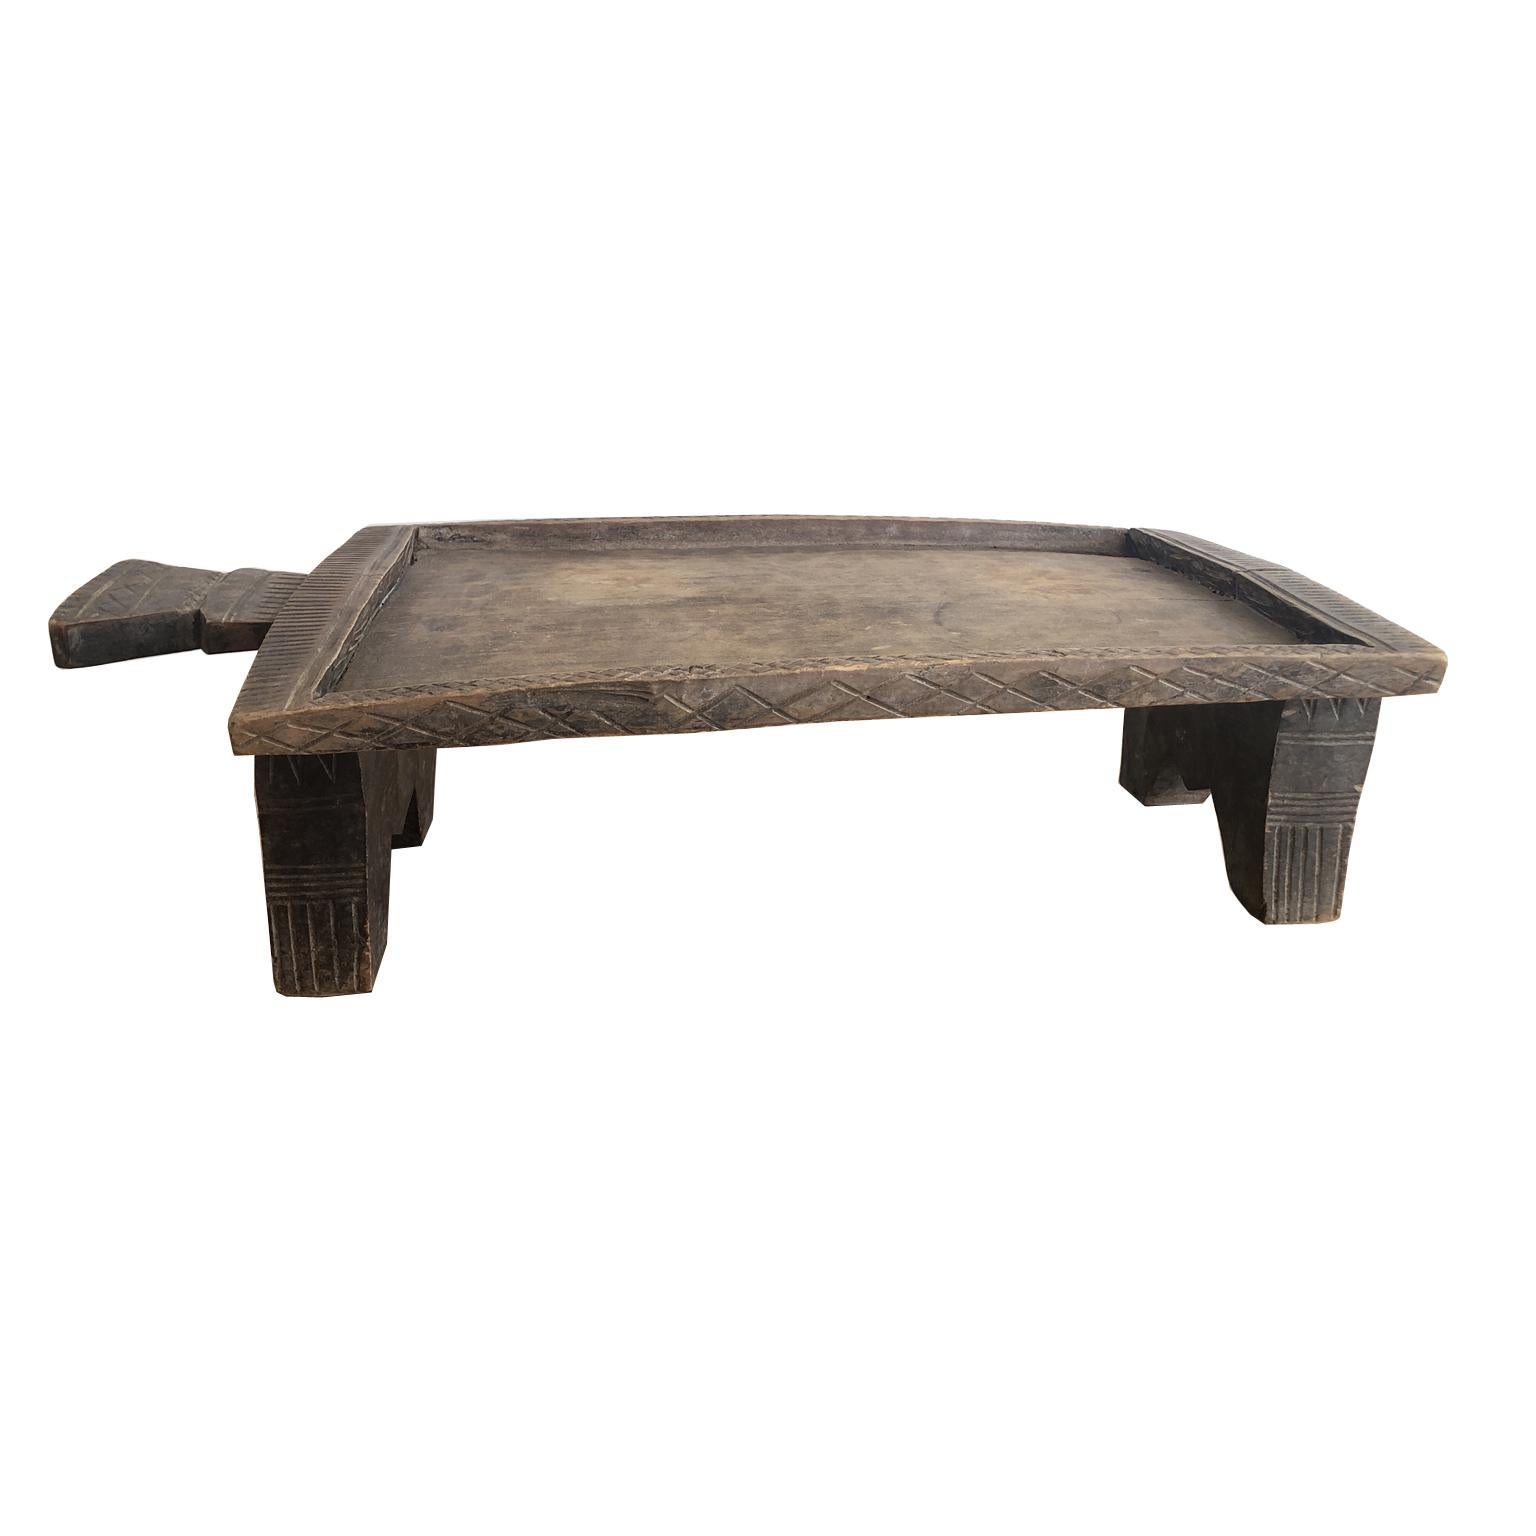 An Ethiopian coffee tray made from a solid piece of wood with rectangular top and handle resting on a trestle base from the Kaffa Province.  Incised geometric carvings embellish the borders of the top and stands, as well as the handle. This tray was